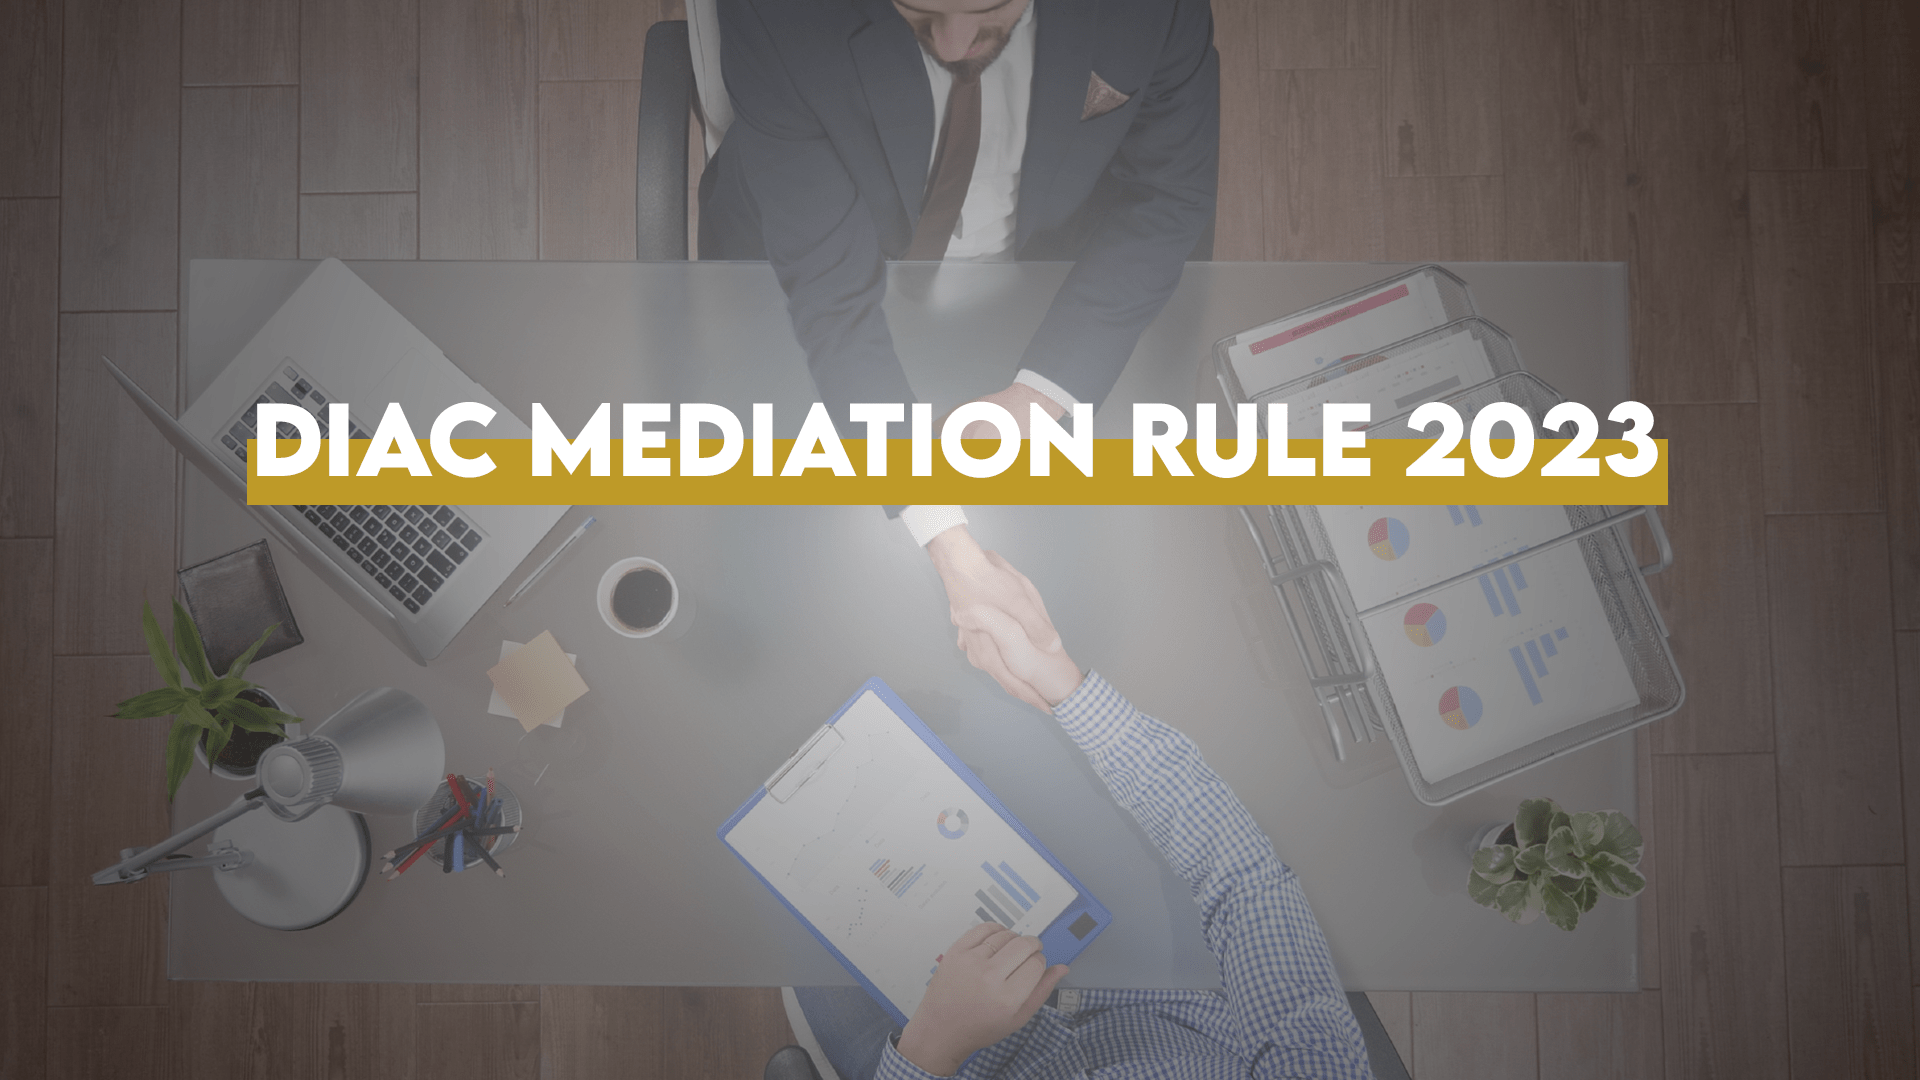 MEDIATION RULES 2023: A NEW LAUNCH BY DIAC